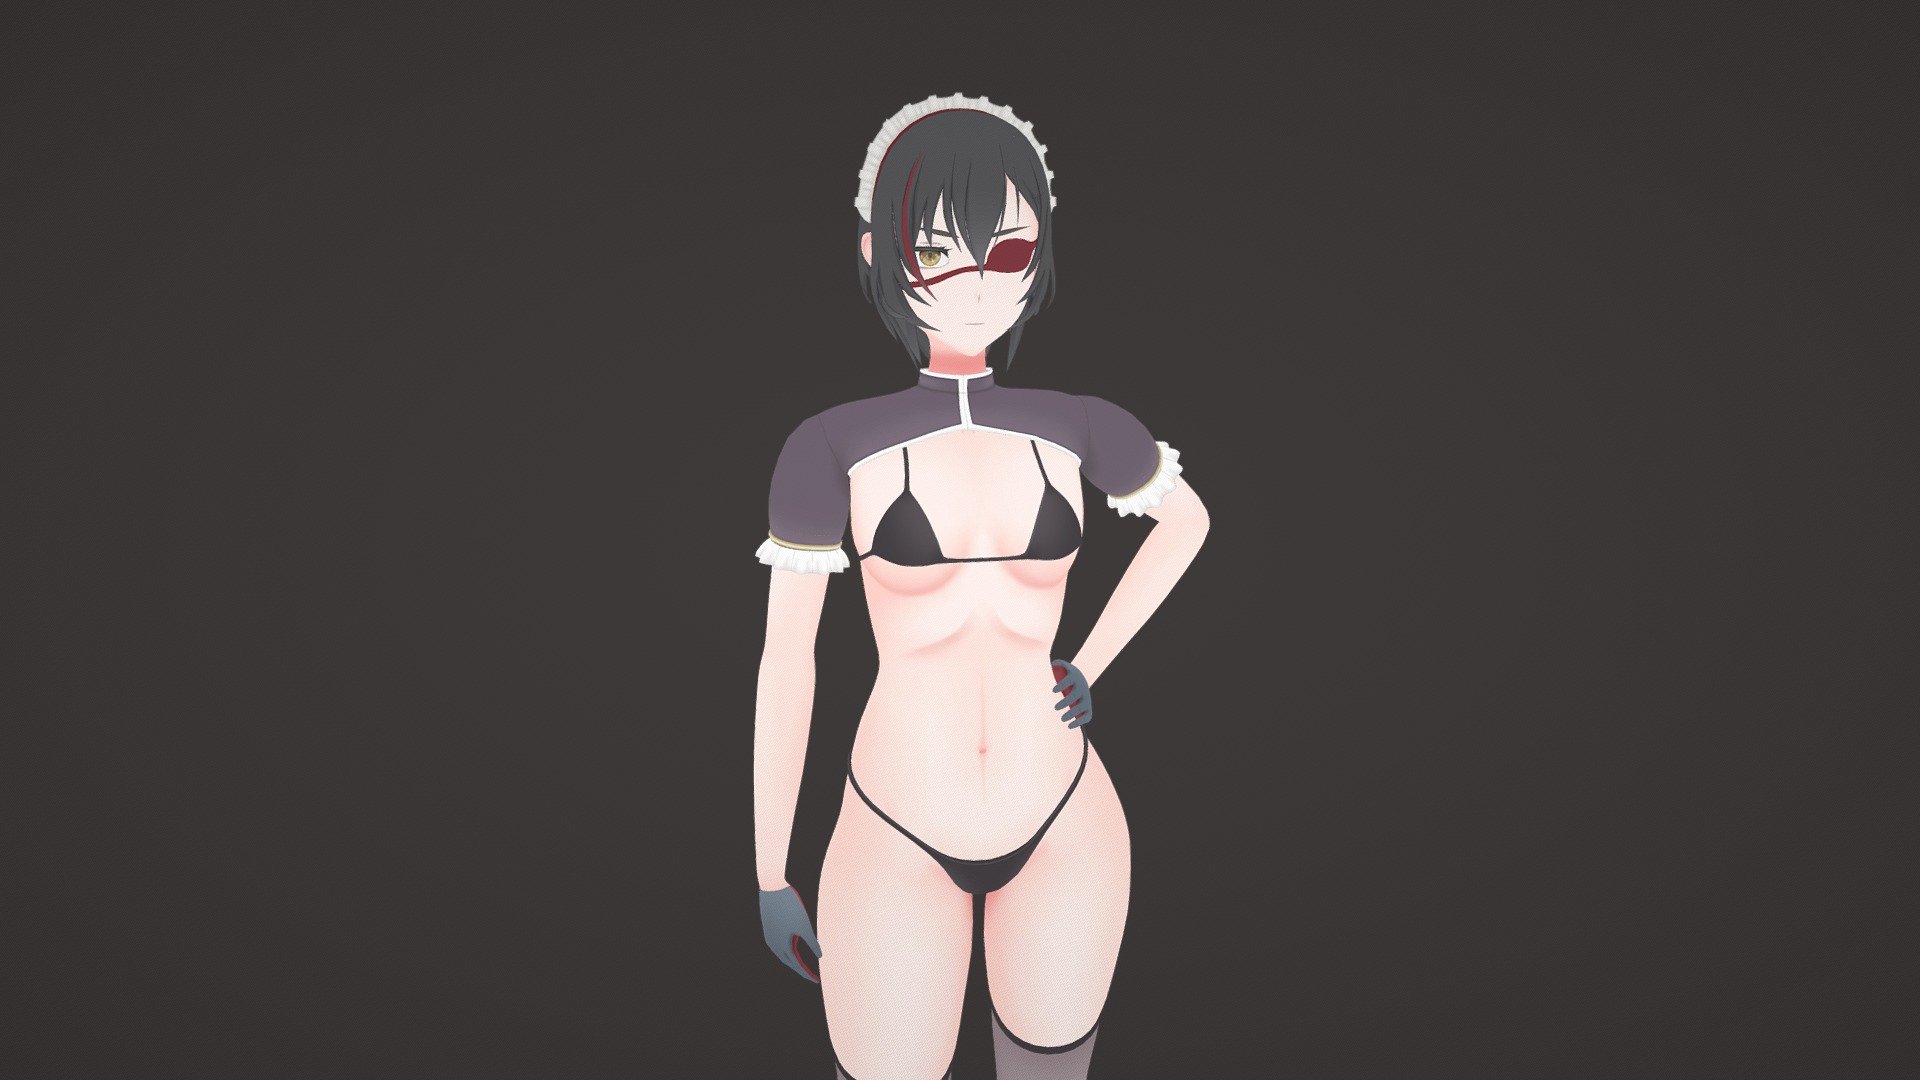 Reference: https://twitter.com/MaidenVoyage18






 - Defective maid - 3D model by Yun-Yun (@YuniLy) 3d model